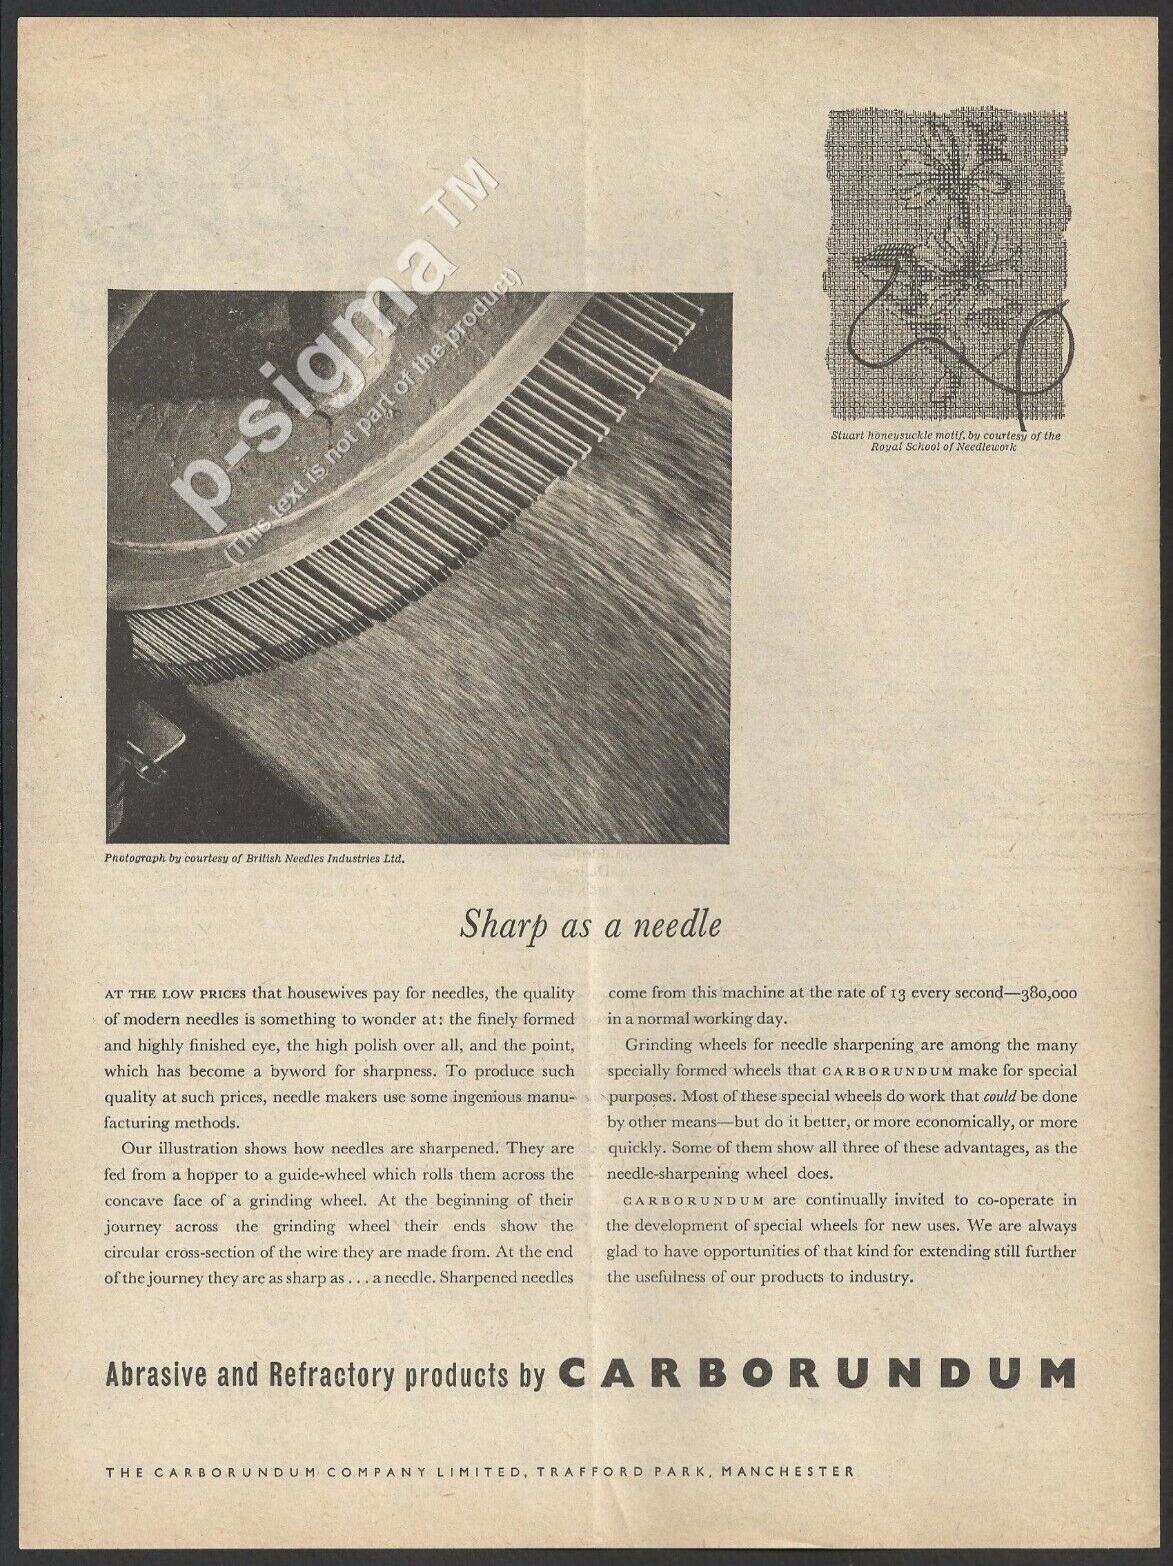 CARBORUNDUM Abrasive and Refractory Products - 1955 Vintage Print Ad